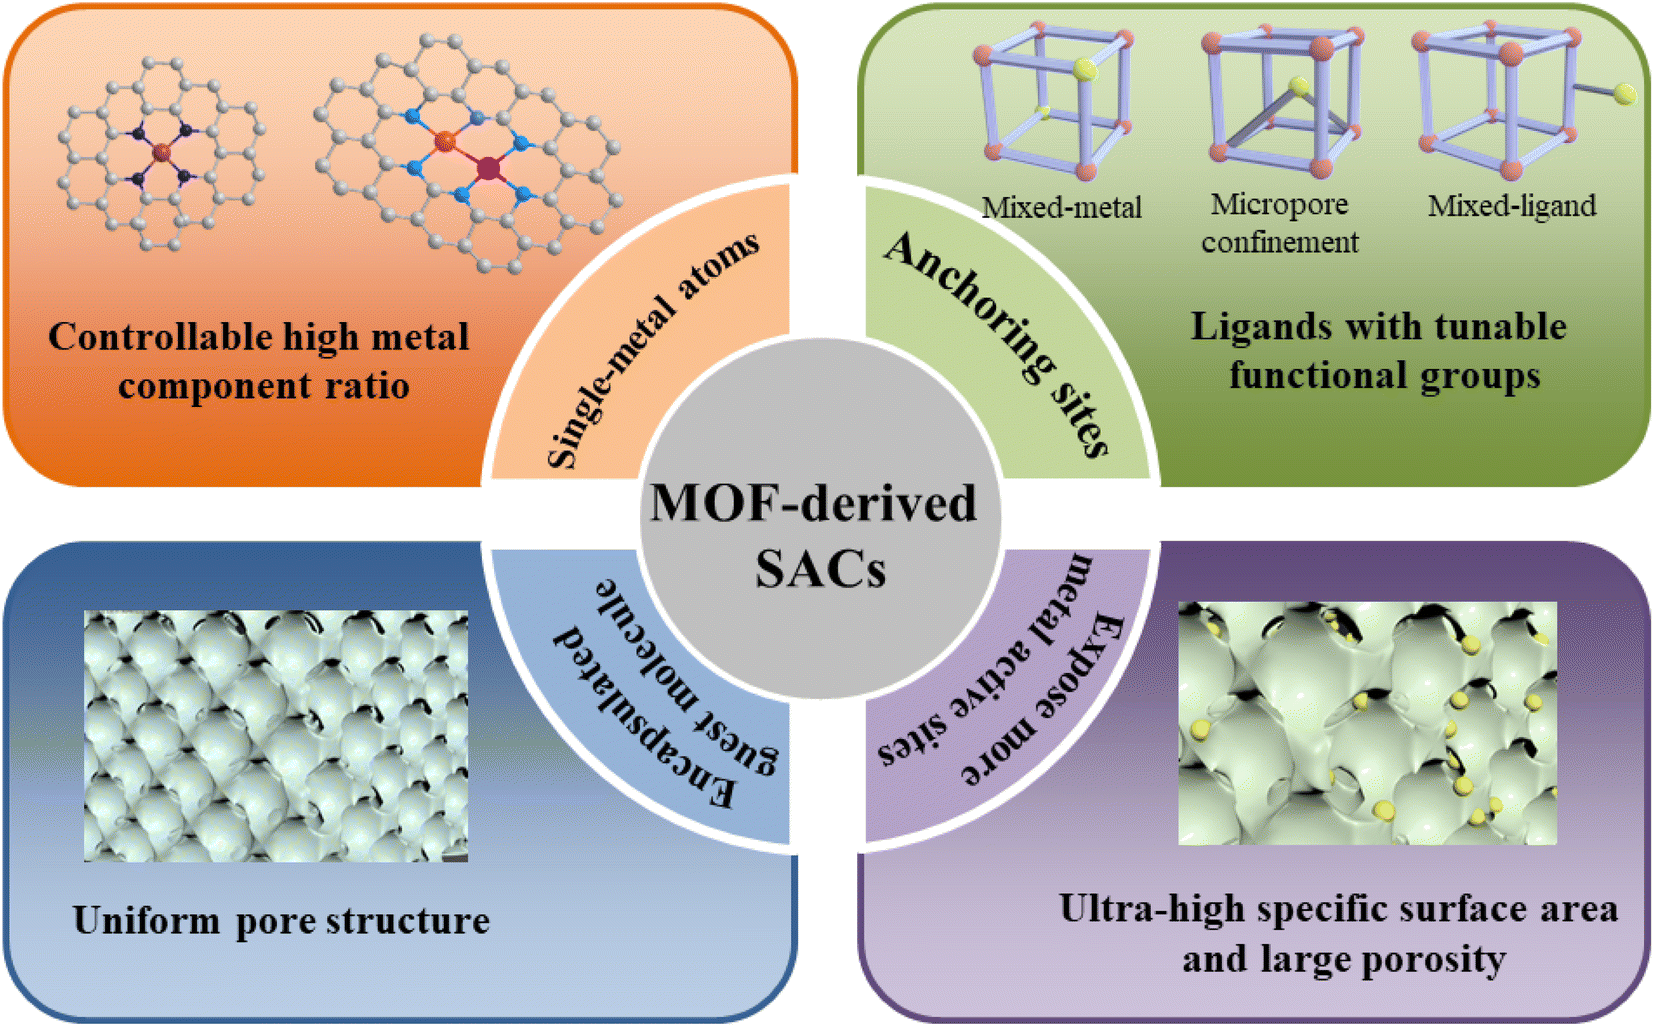 Recent advances and future perspectives in MOF-derived single-atom 